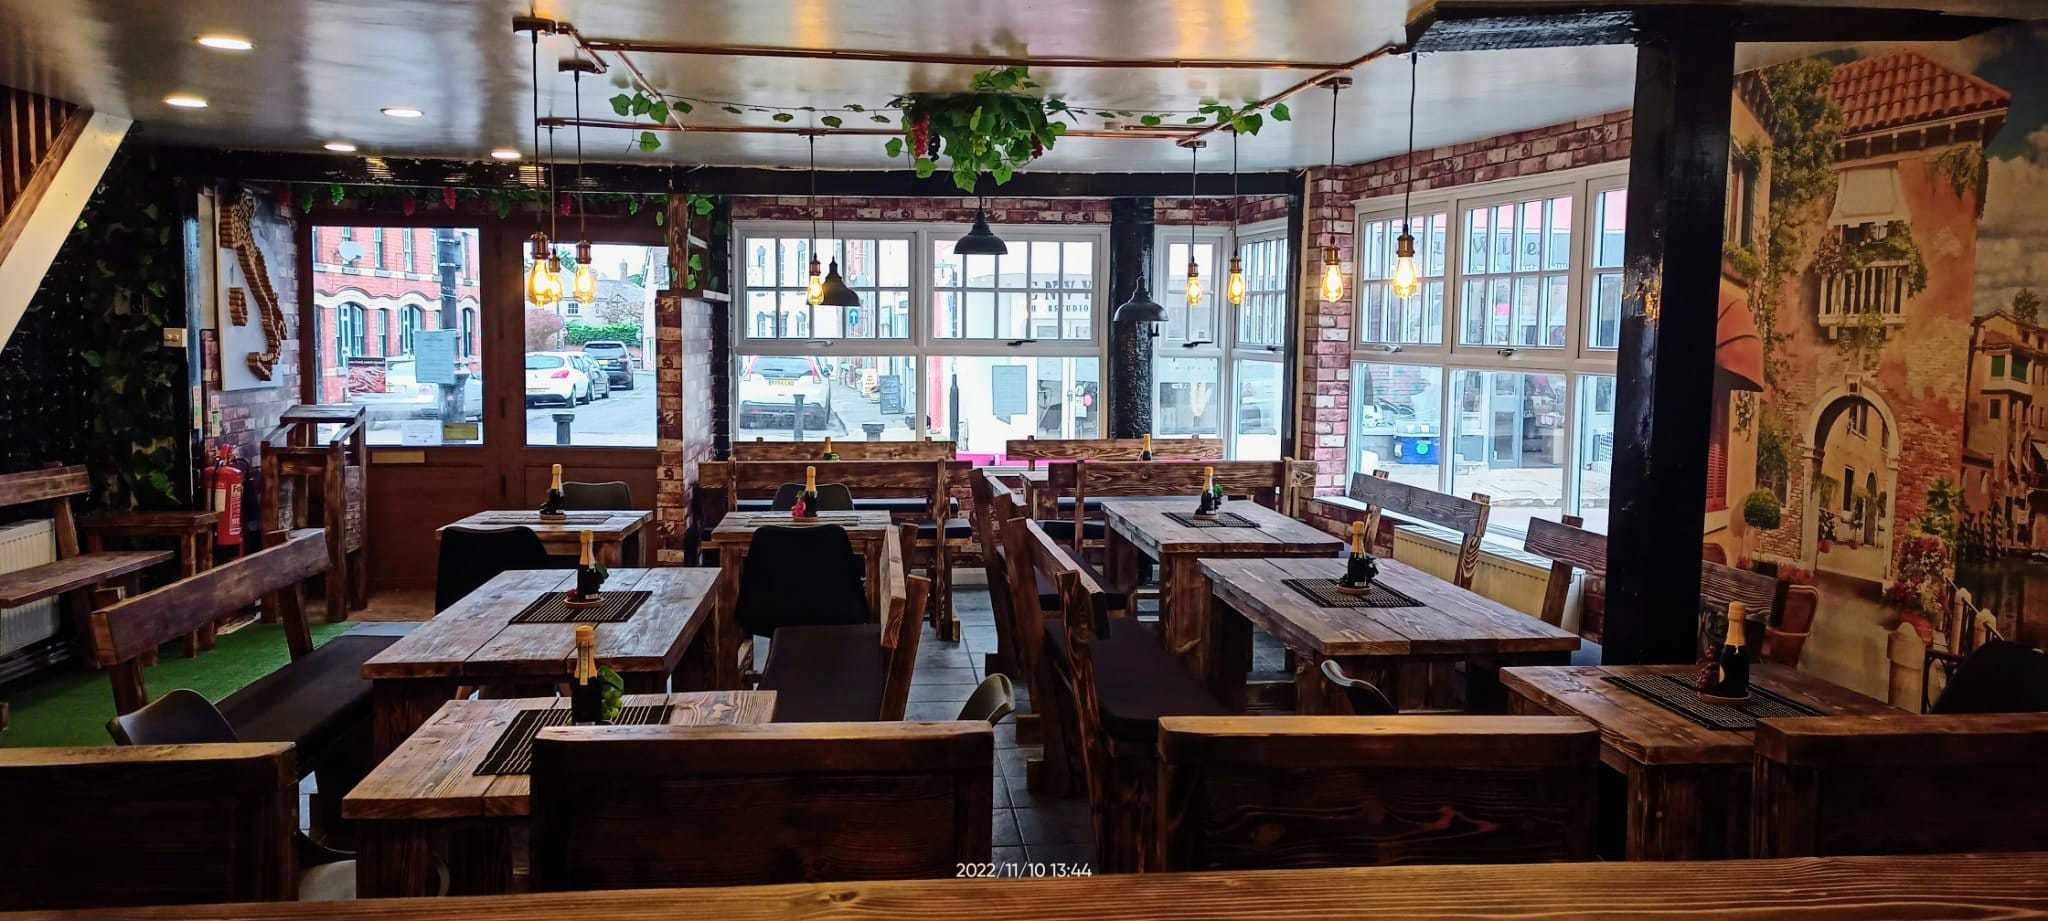  Inside the new Il Vigneto authentic Italian restaurant in West Street, Leominster 